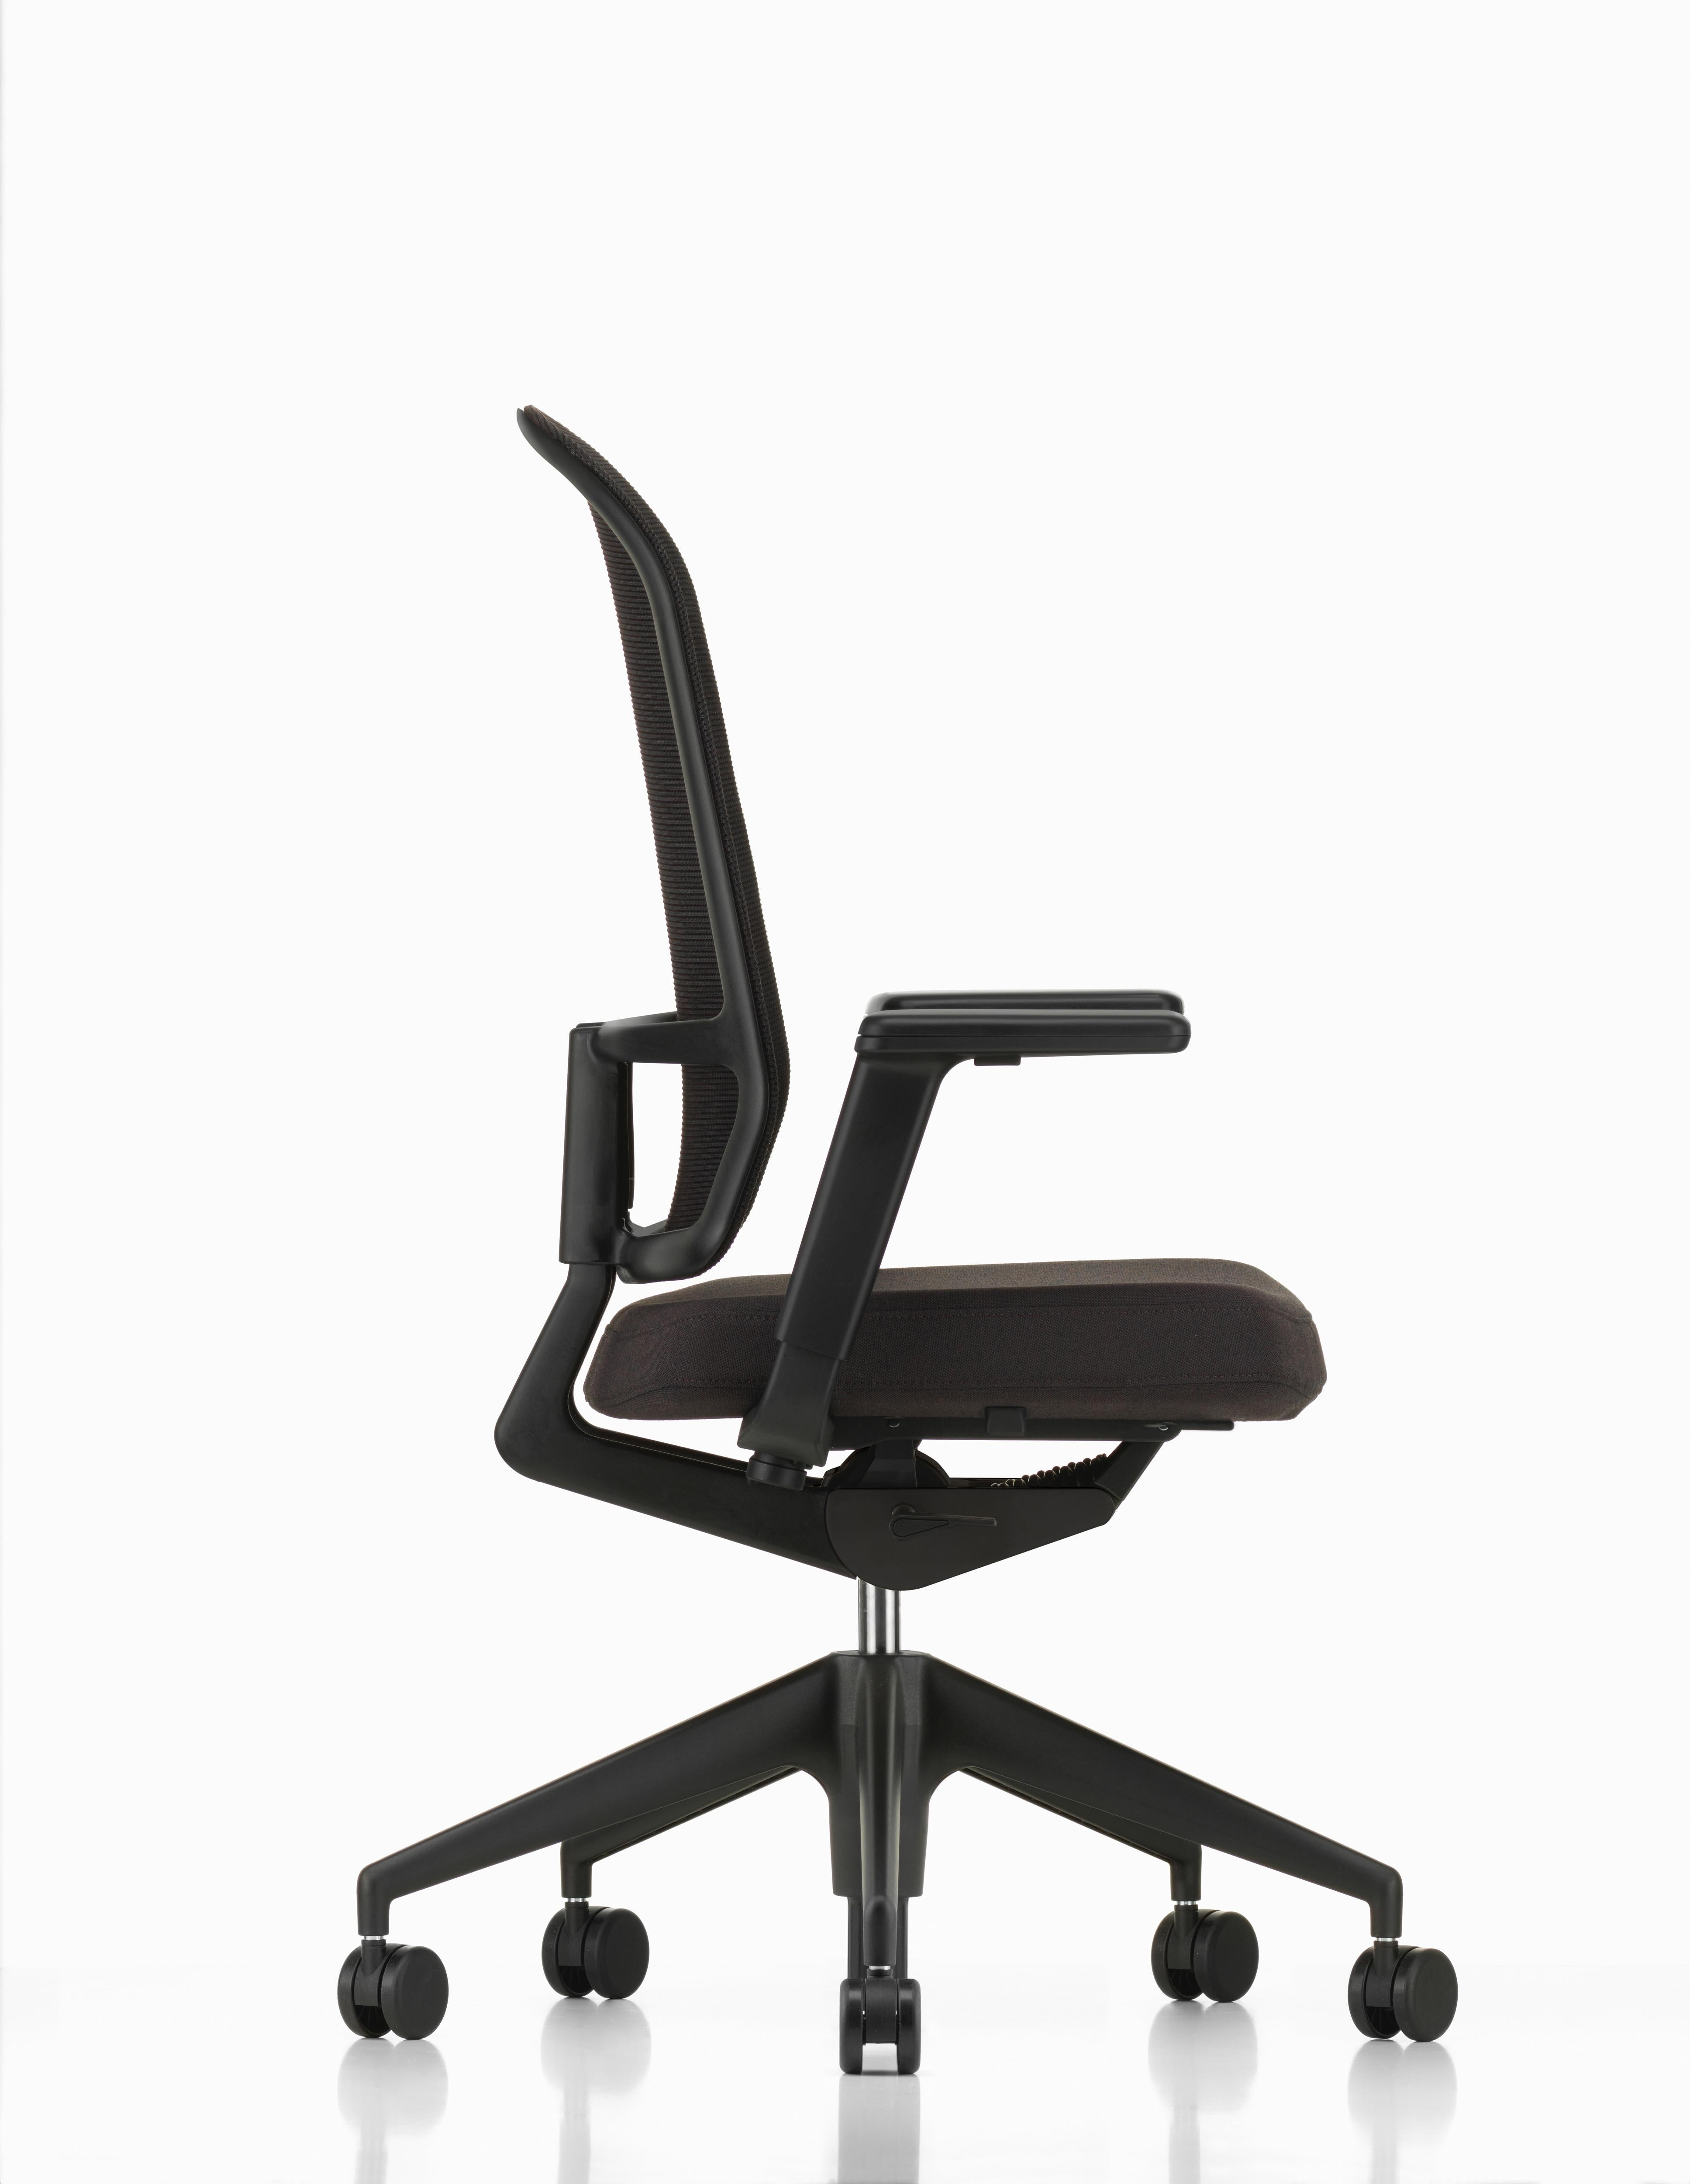 Modern Vitra AM Chair in Black LightNet and Nero Plano Seat by Alberto Meda For Sale